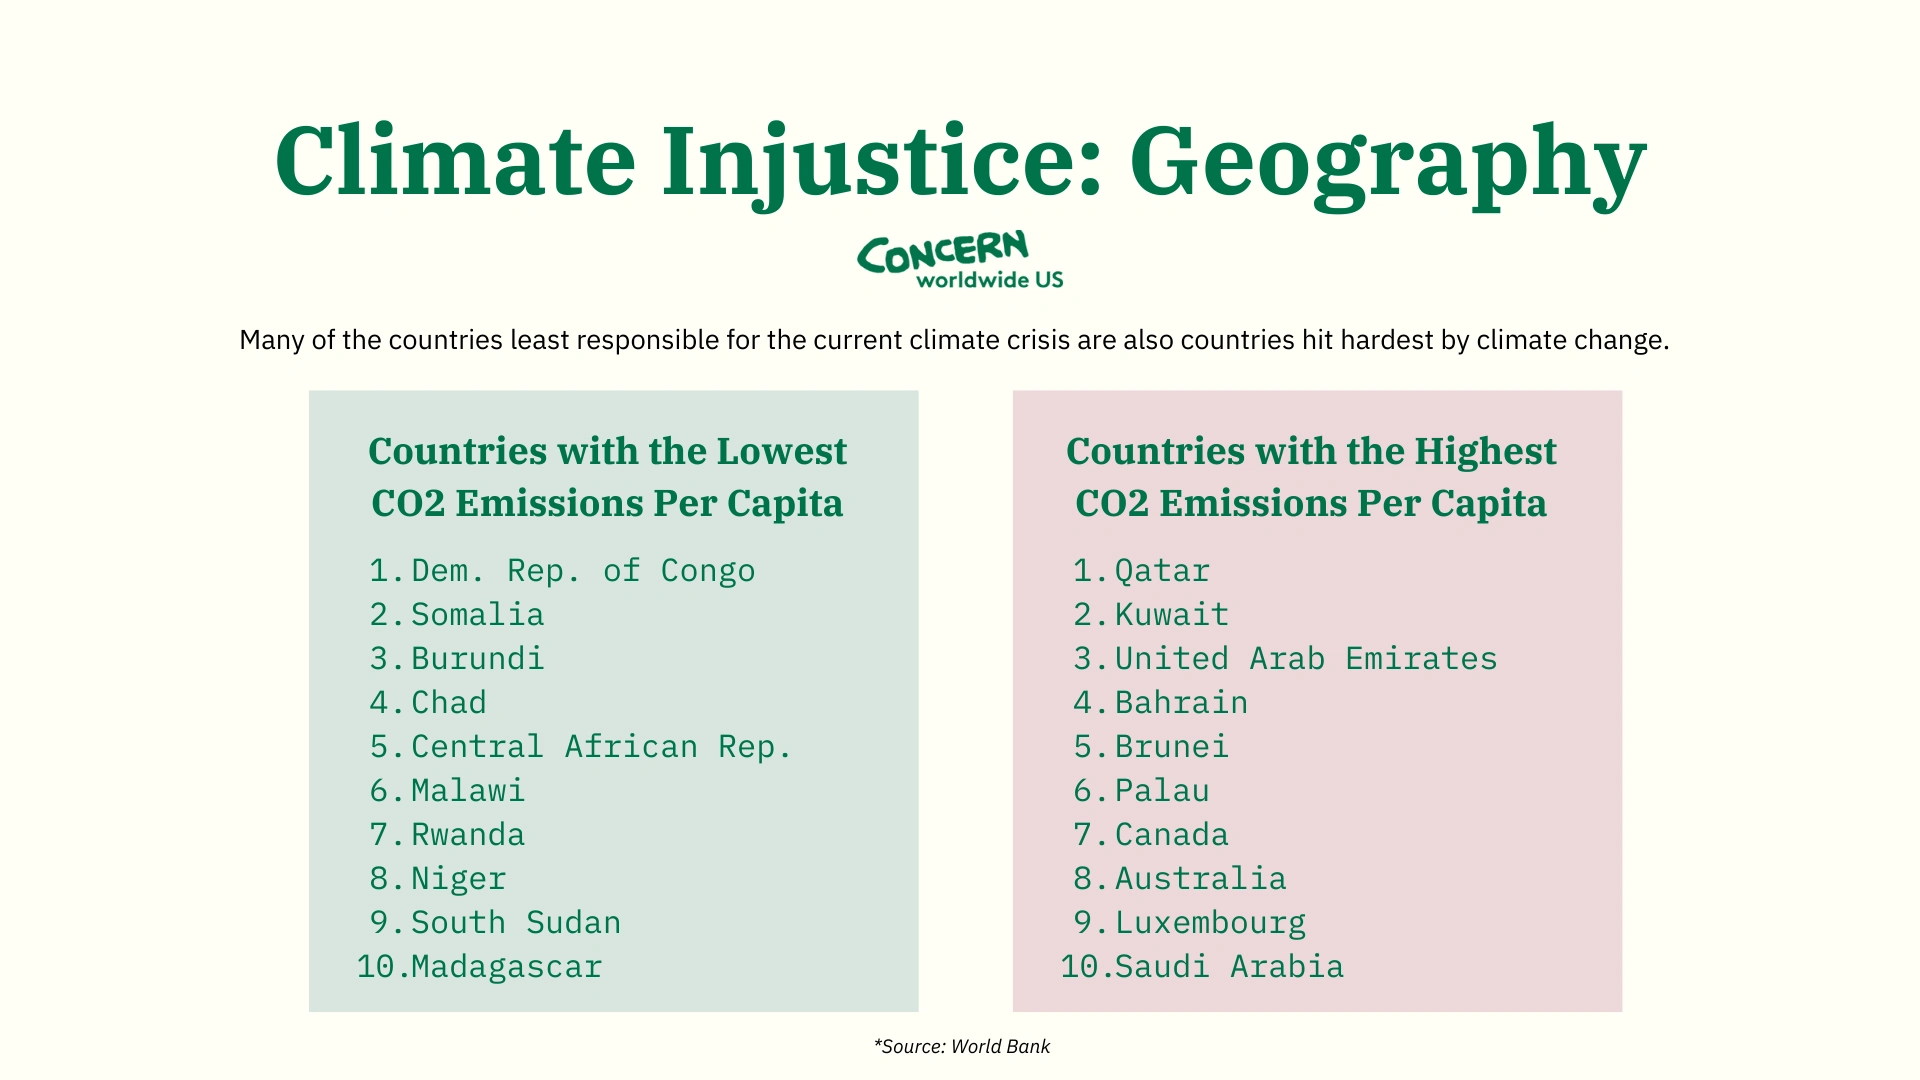 Infographic listing countries with high emission levels per capita and low emission levels per capita